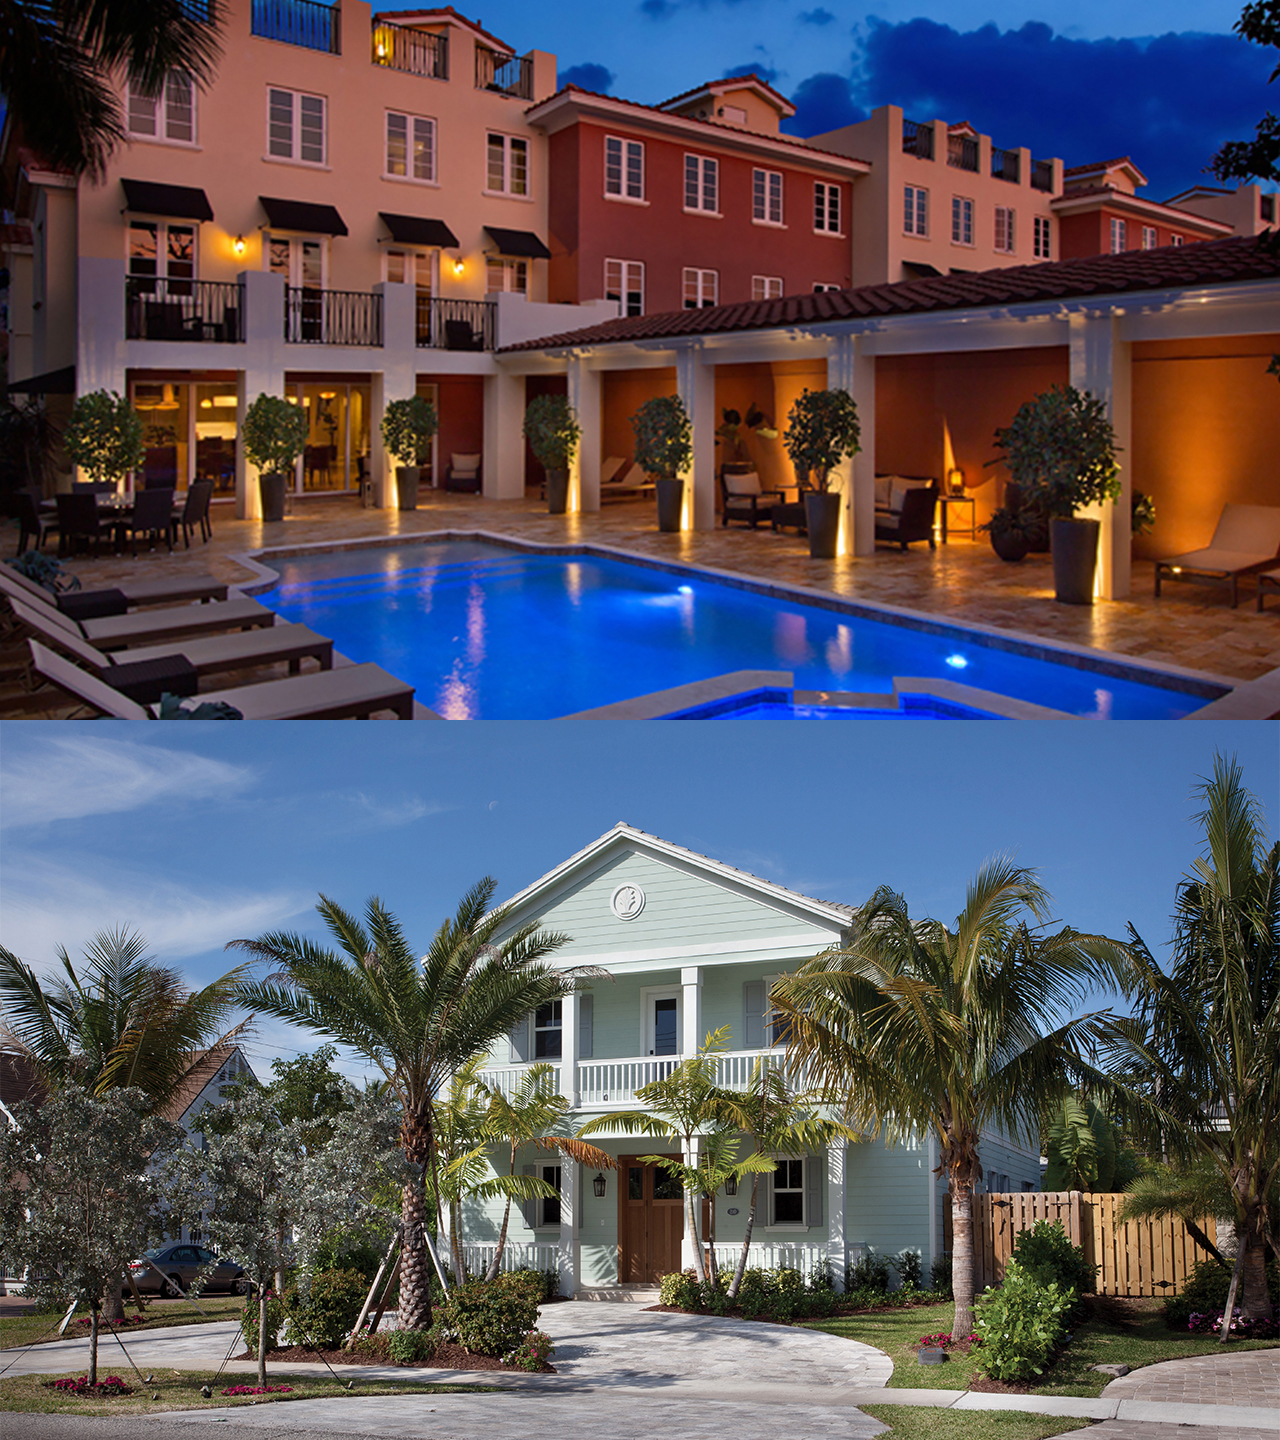 Luxury Townhome and Luxury Residence Properties from Delray Beach Luxury Real Estate Broker Associates Pascal Liguori & Son